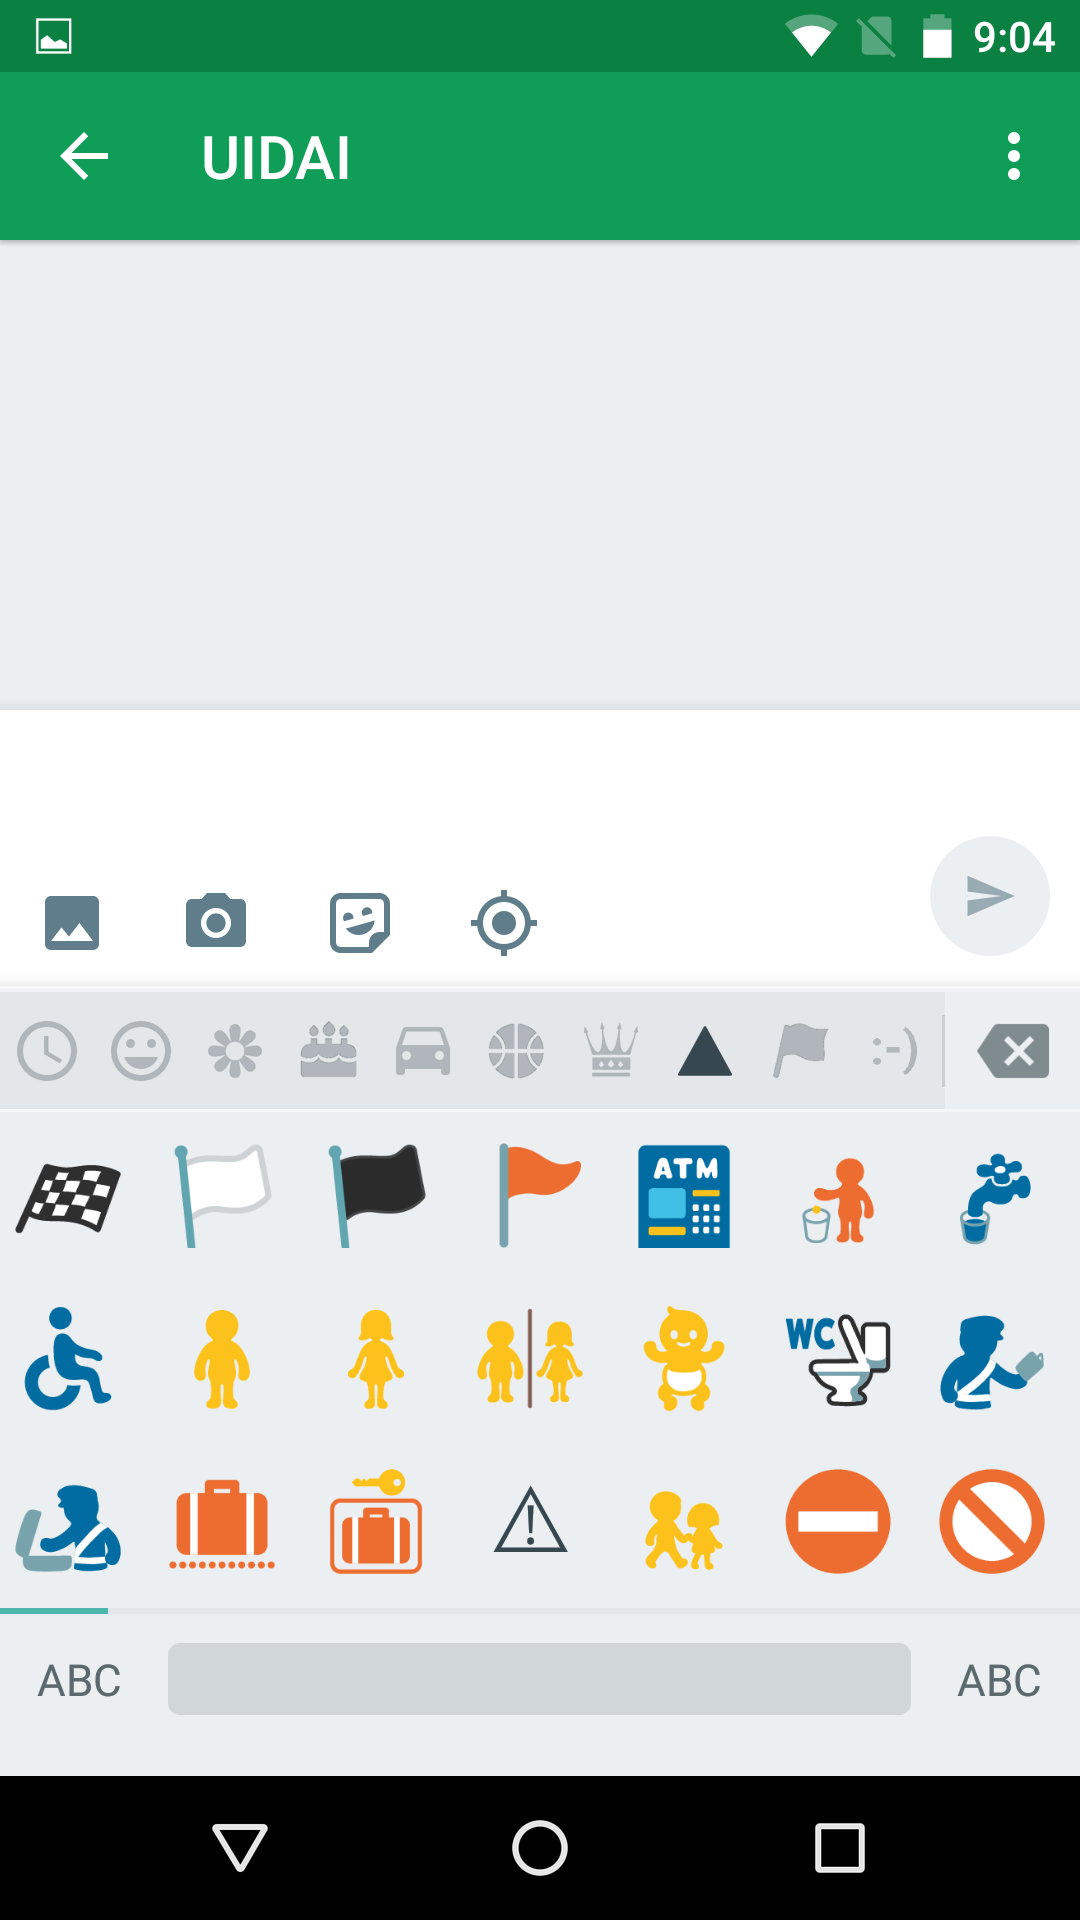 New Emojis in Android 6.0.1